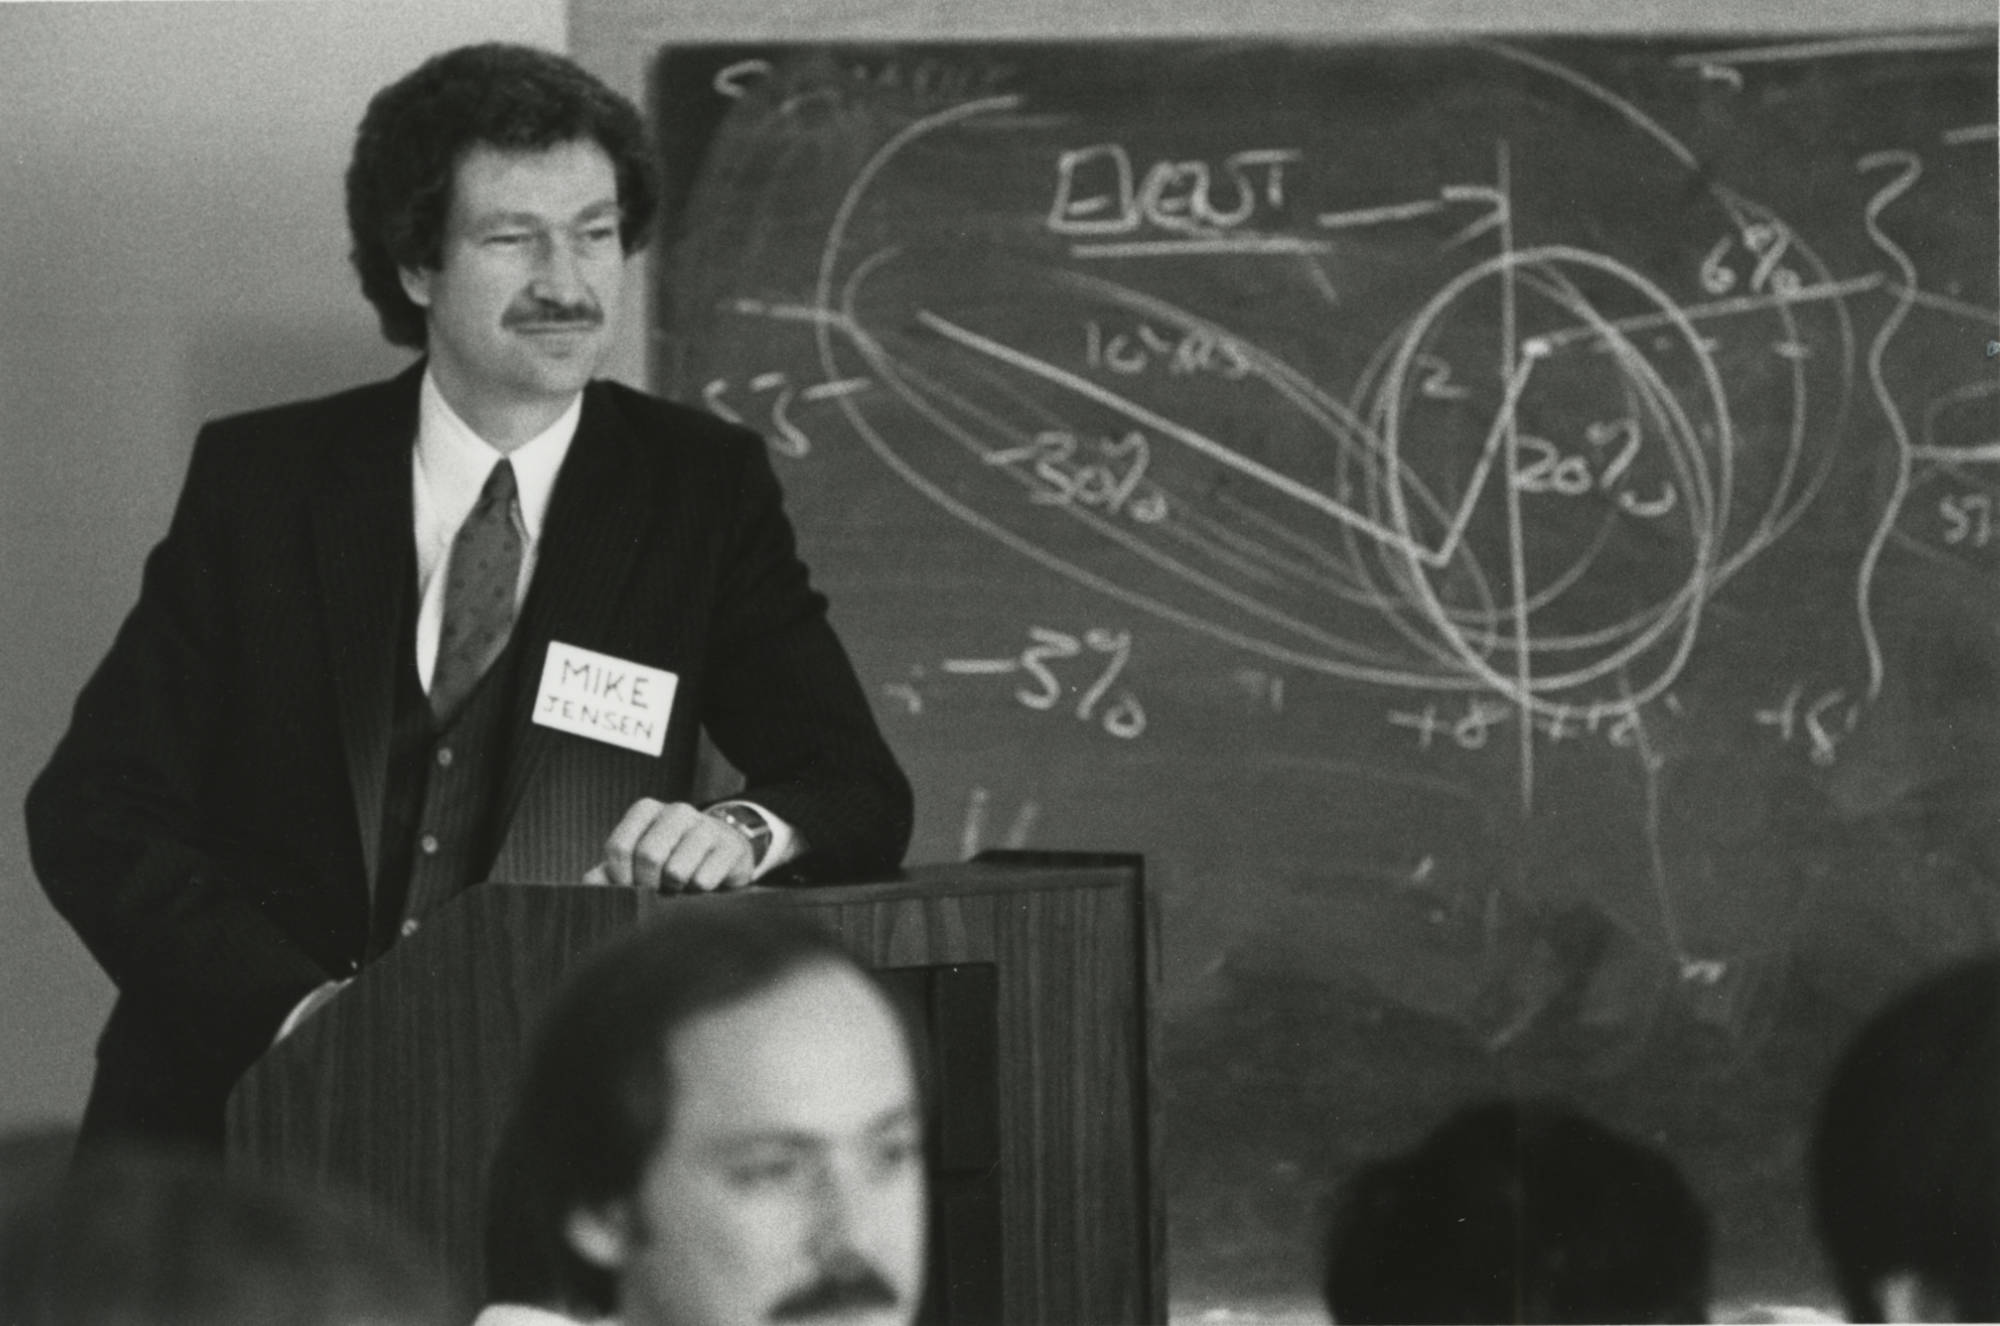 Black and white archival photo of Michael Jensen in a suit and with a big name tag standing at a podium in front of a classroom with a blackboard scribbled with percentages and other figures in the background.